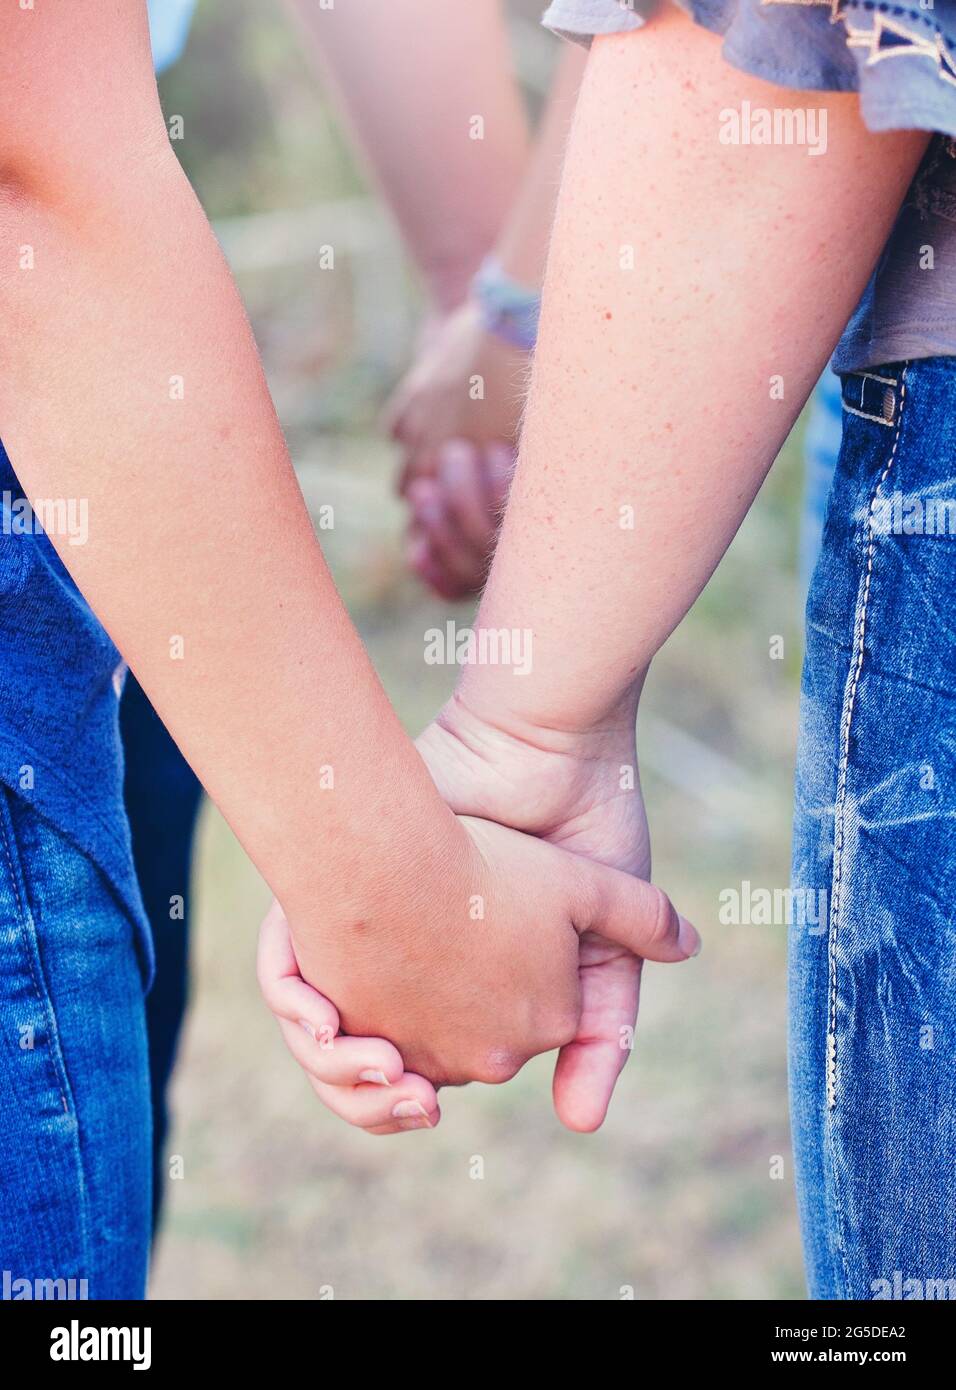 Group of People Praying in a Circle Holding Hands Stock Photo